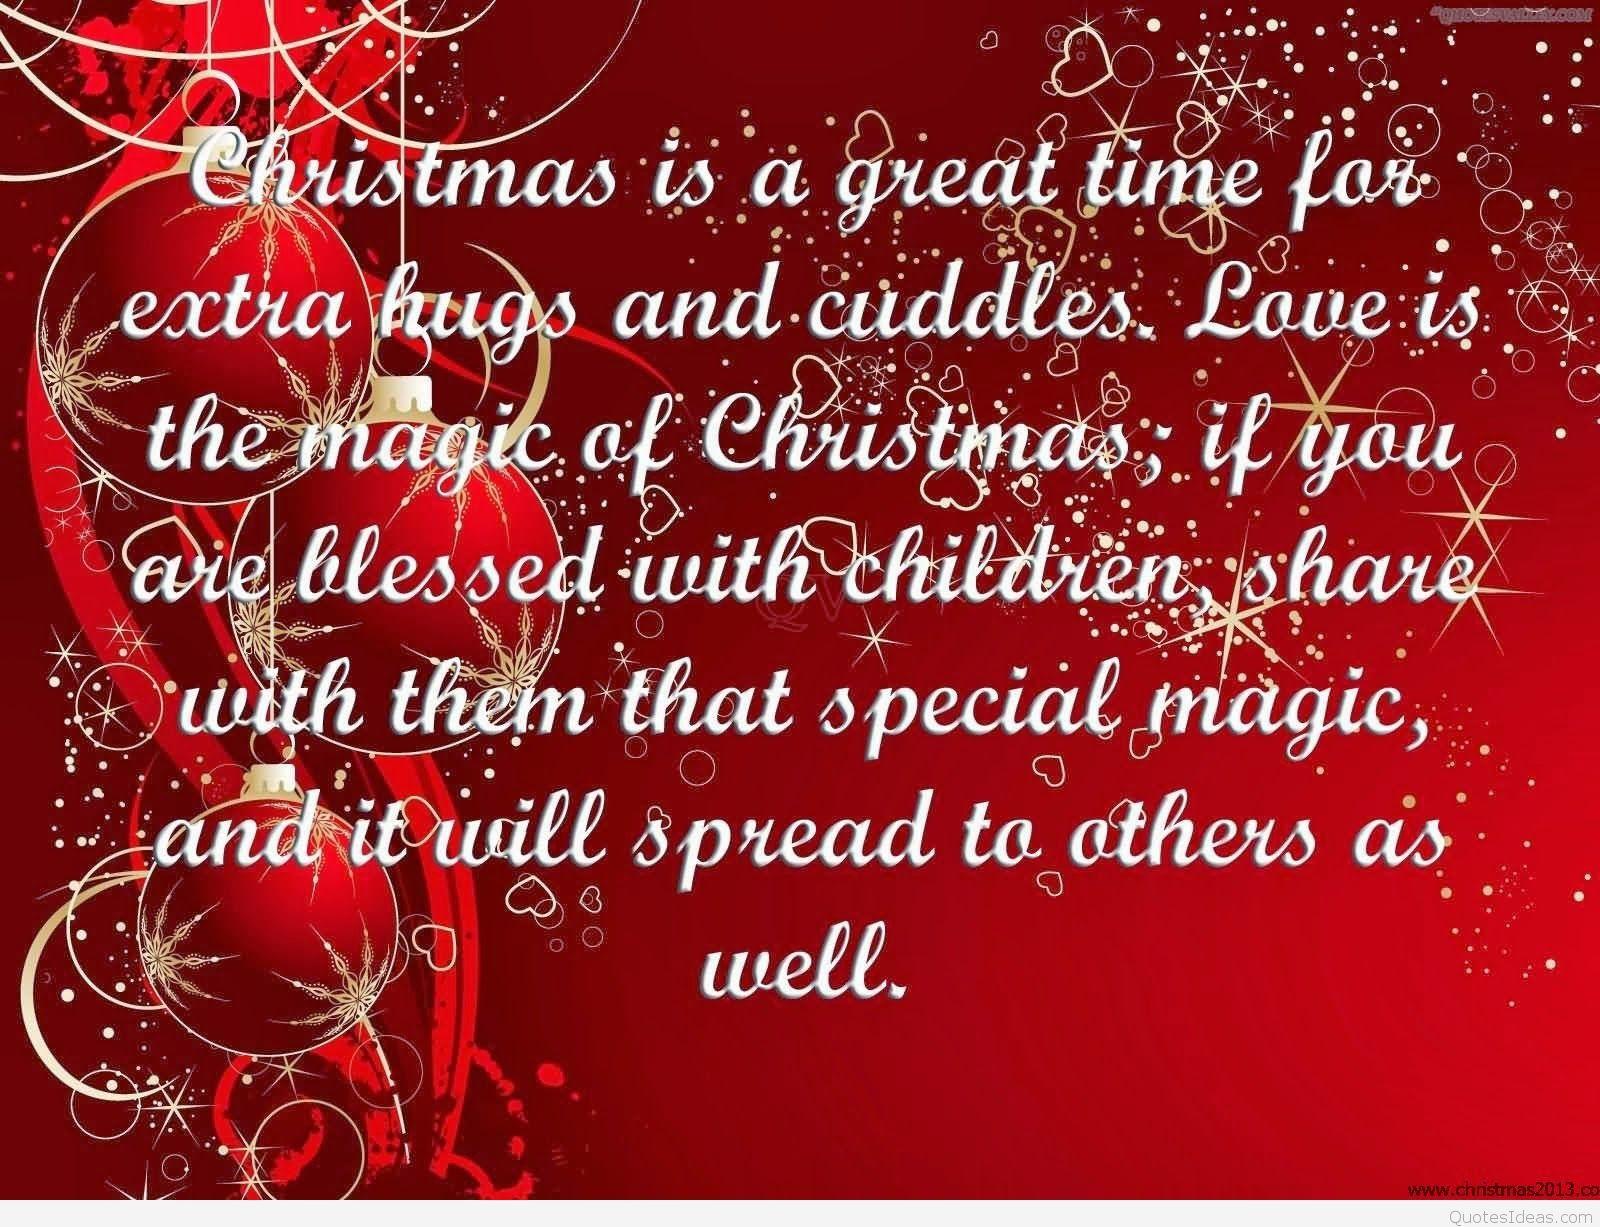 Best Christmas mobile & iphone quotes wallpaper